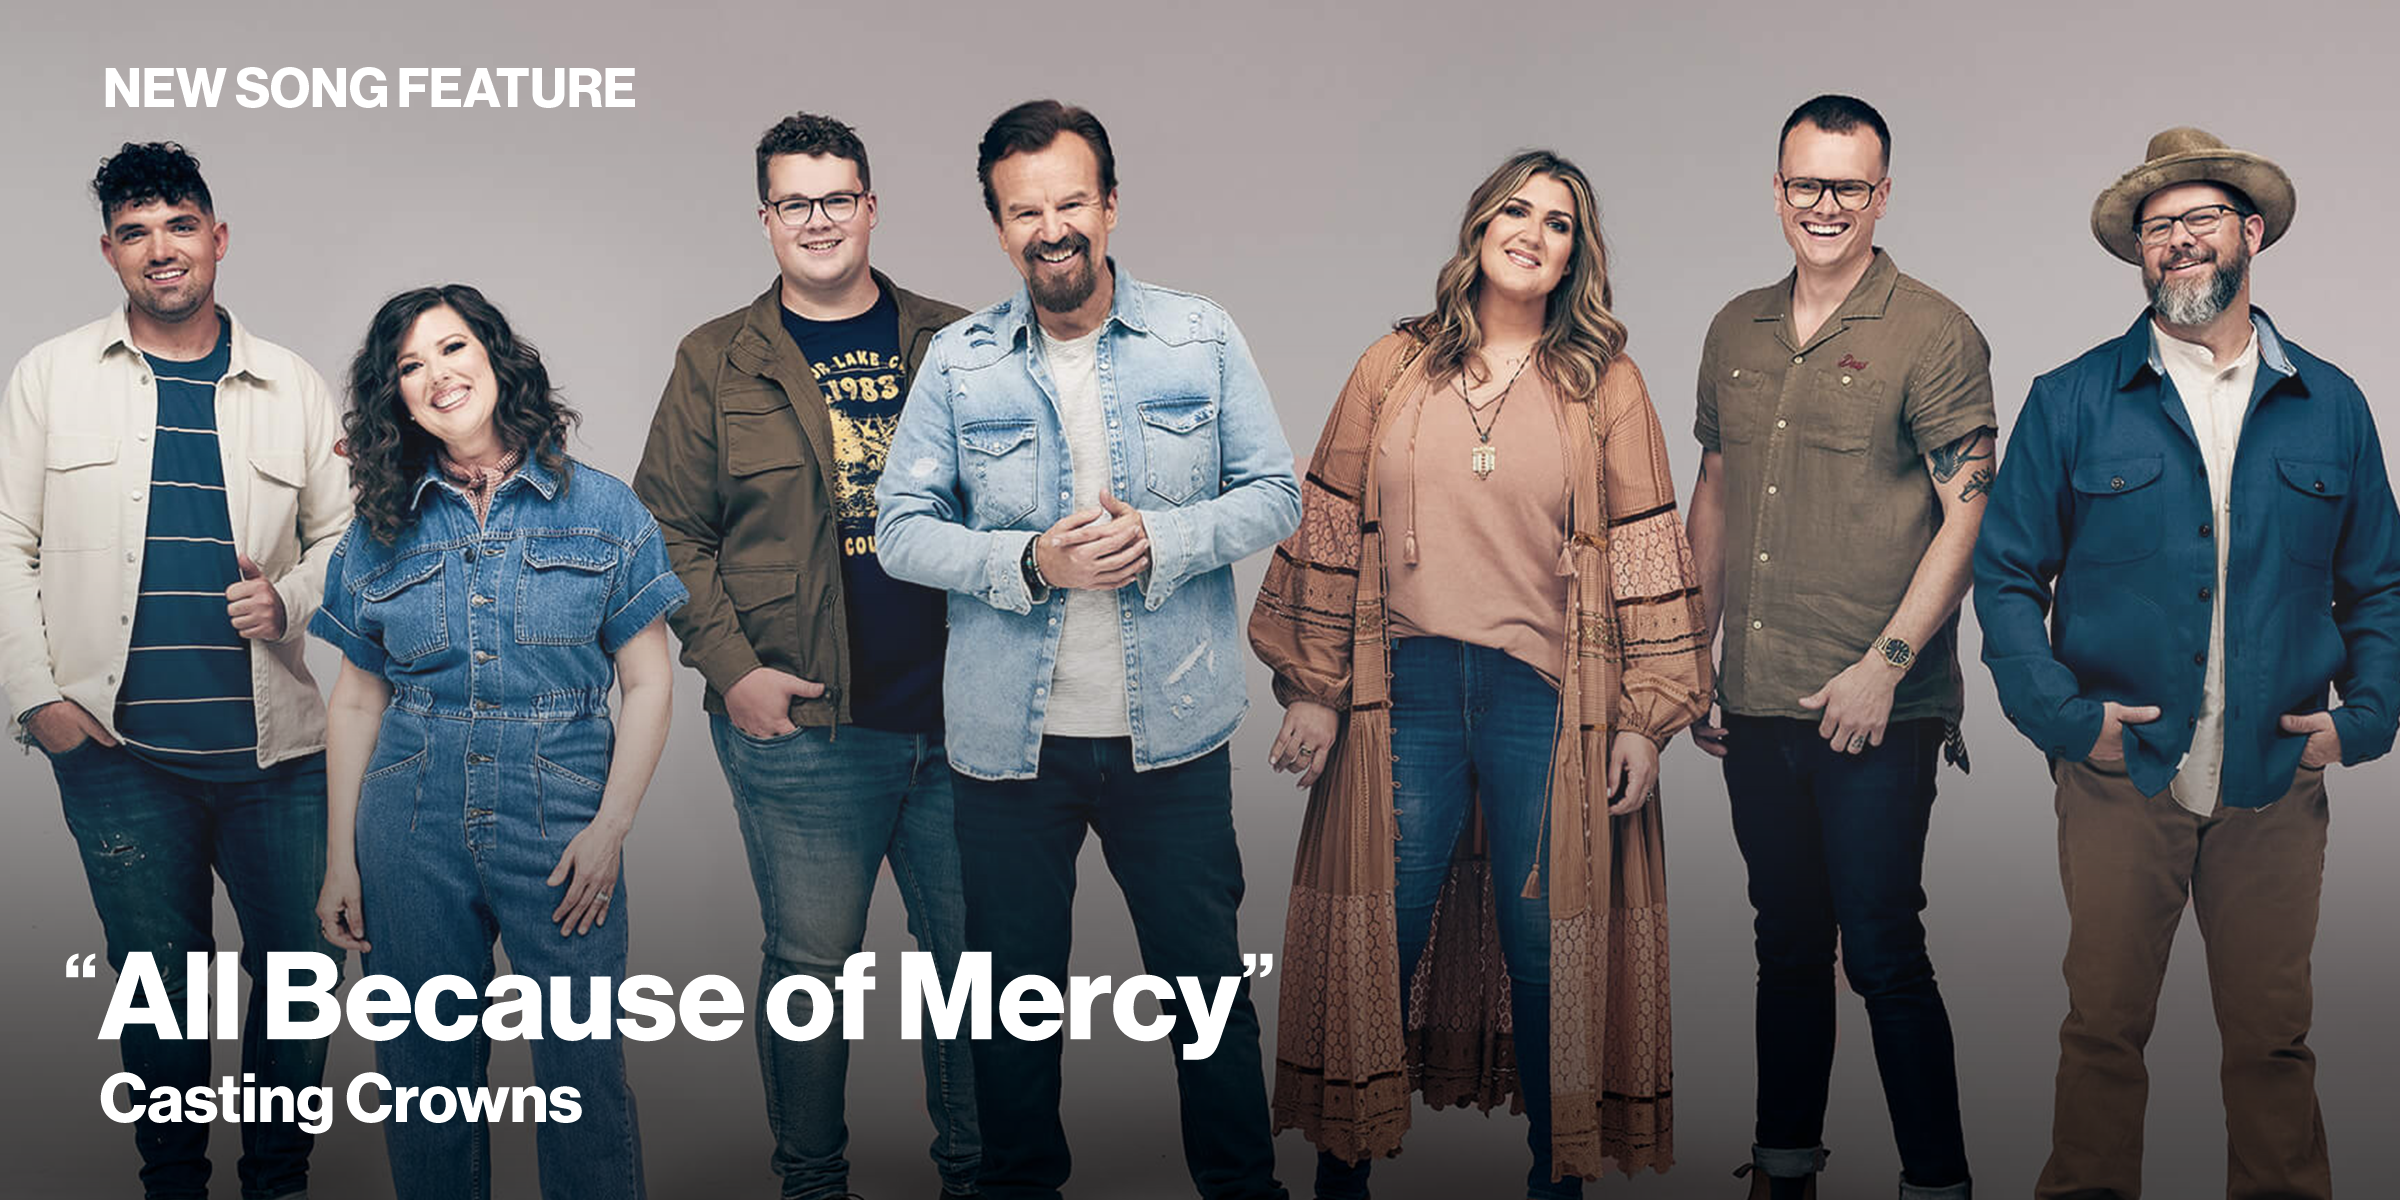 New Song Feature: "All Because of Mercy" Casting Crowns